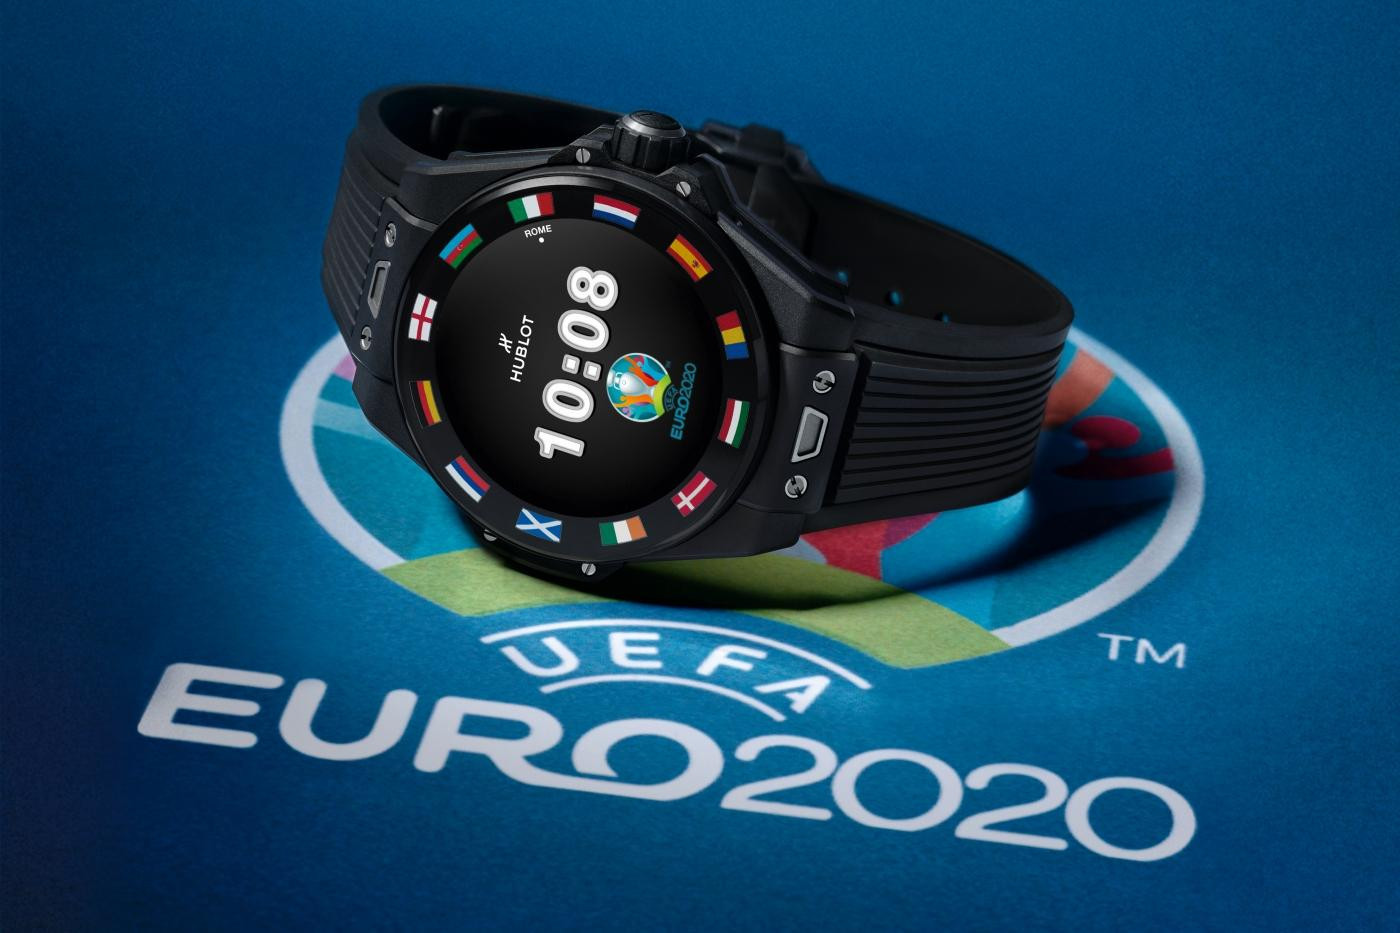 Hublot launch limited edition watch to mark sponsorship of Euro 2020